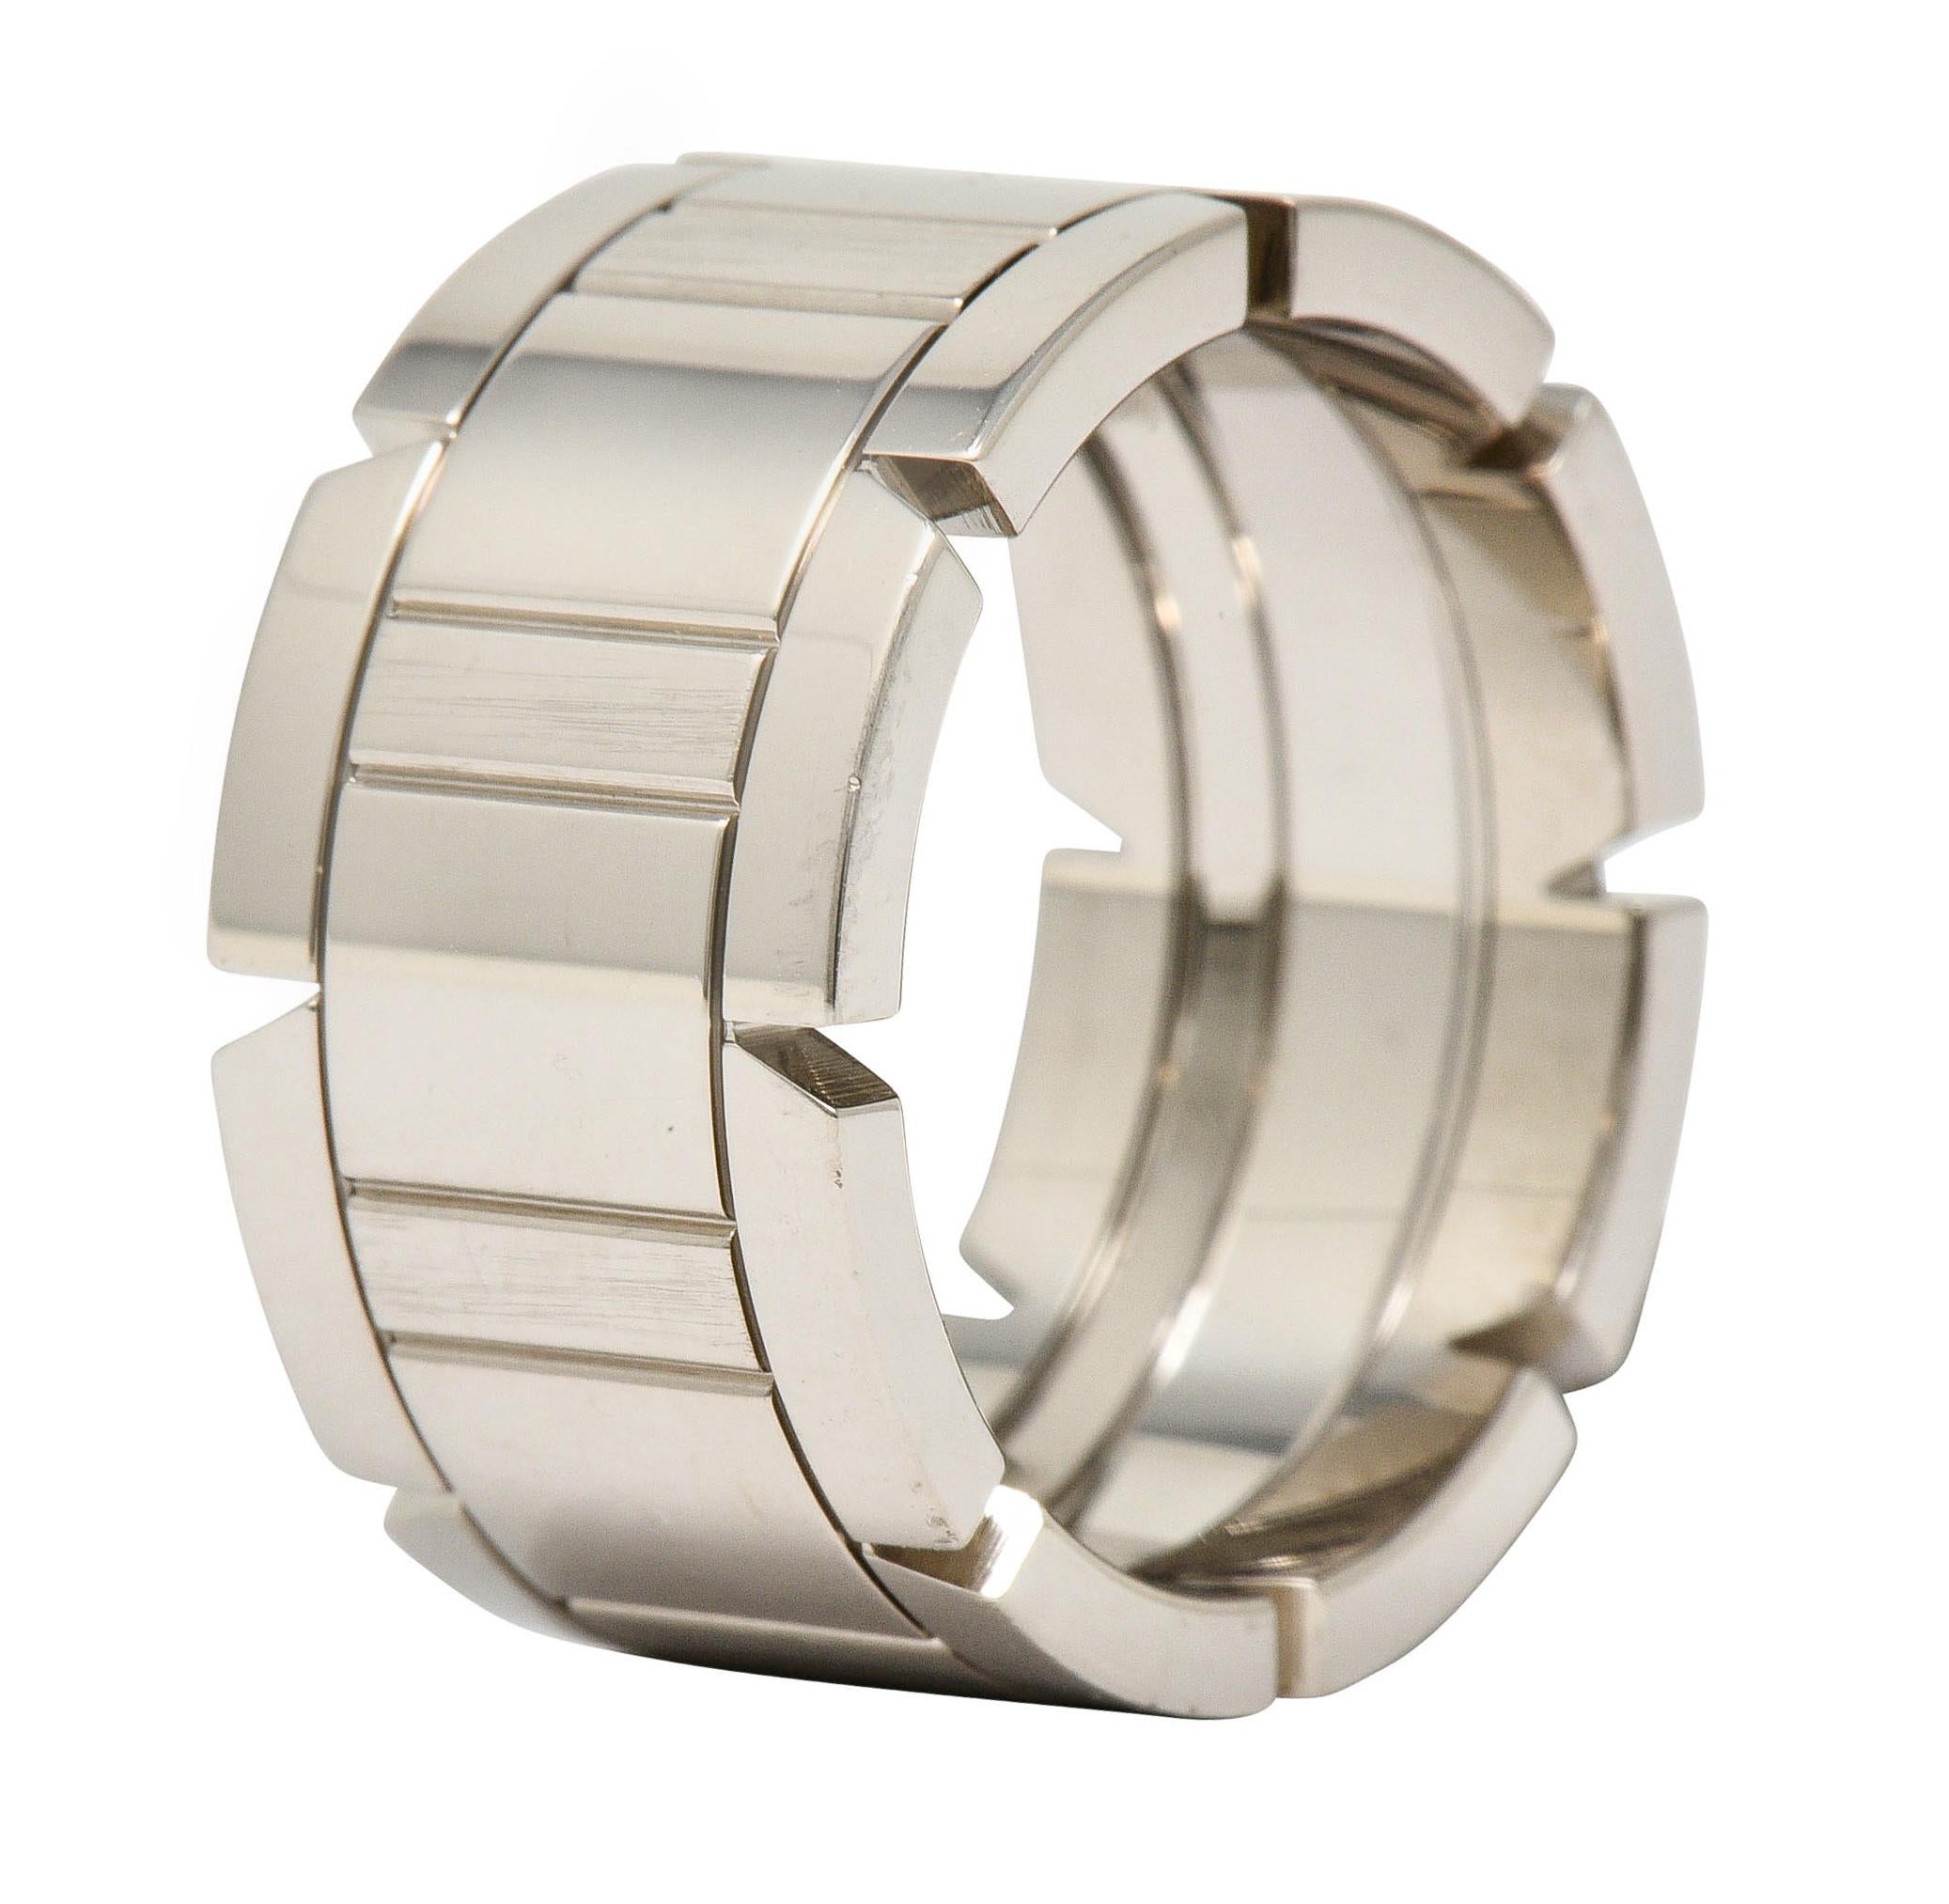 Wide band ring features a deeply engraved center depicting wide and narrow rectangles

Flanked by polished white gold edges with a pierced triangular motif

Numbered and fully signed Cartier with French maker's mark

Stamped 750 for 18 karat